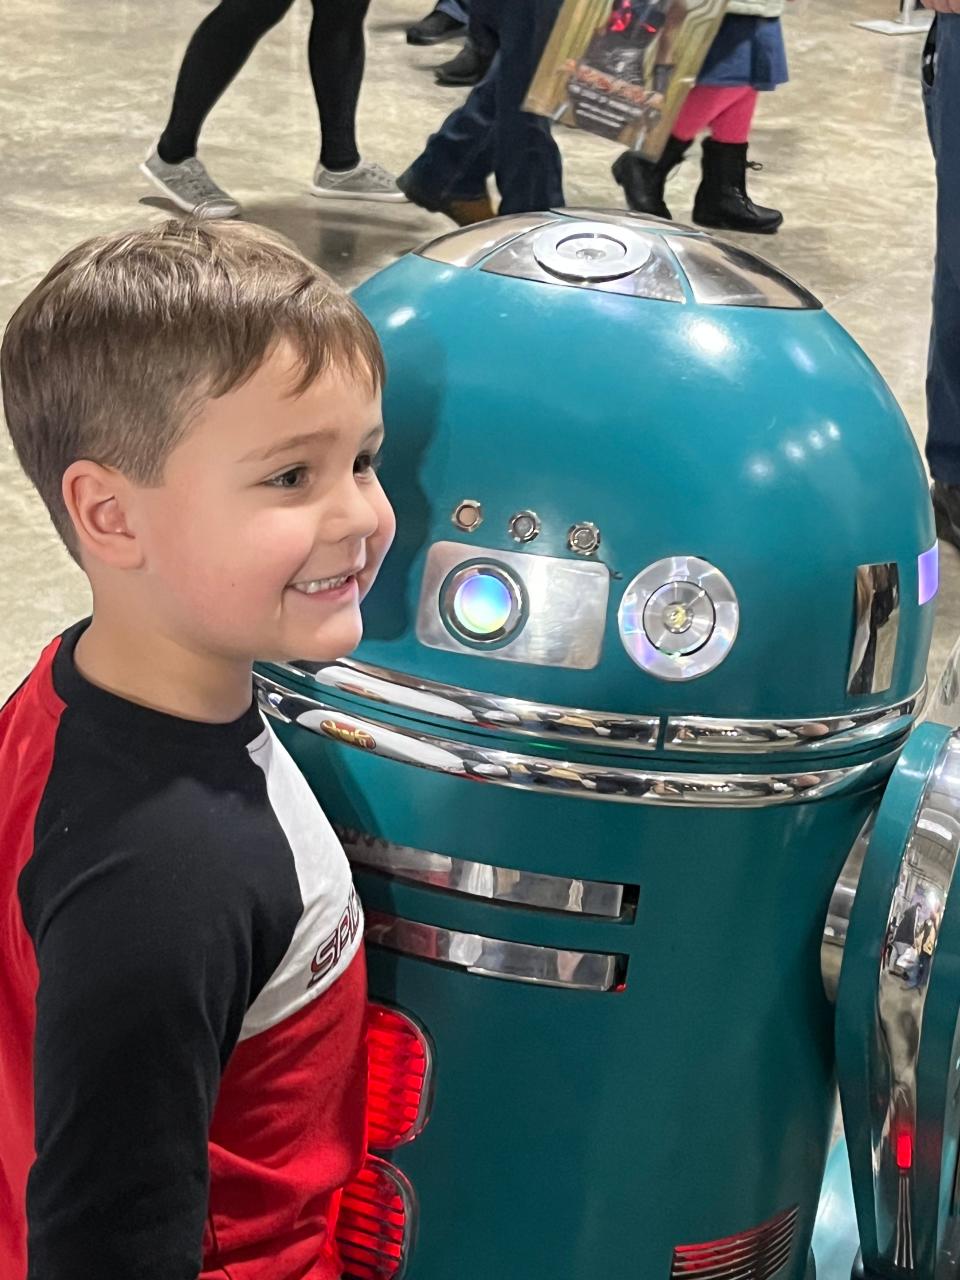 Milo Acker of Granger liked the friendly droid Artoo Deco that the R2 Builder Club of Fort Wayne used to entertain guests at the Comic Con. The club also uses the droids to inspire STEM studies.